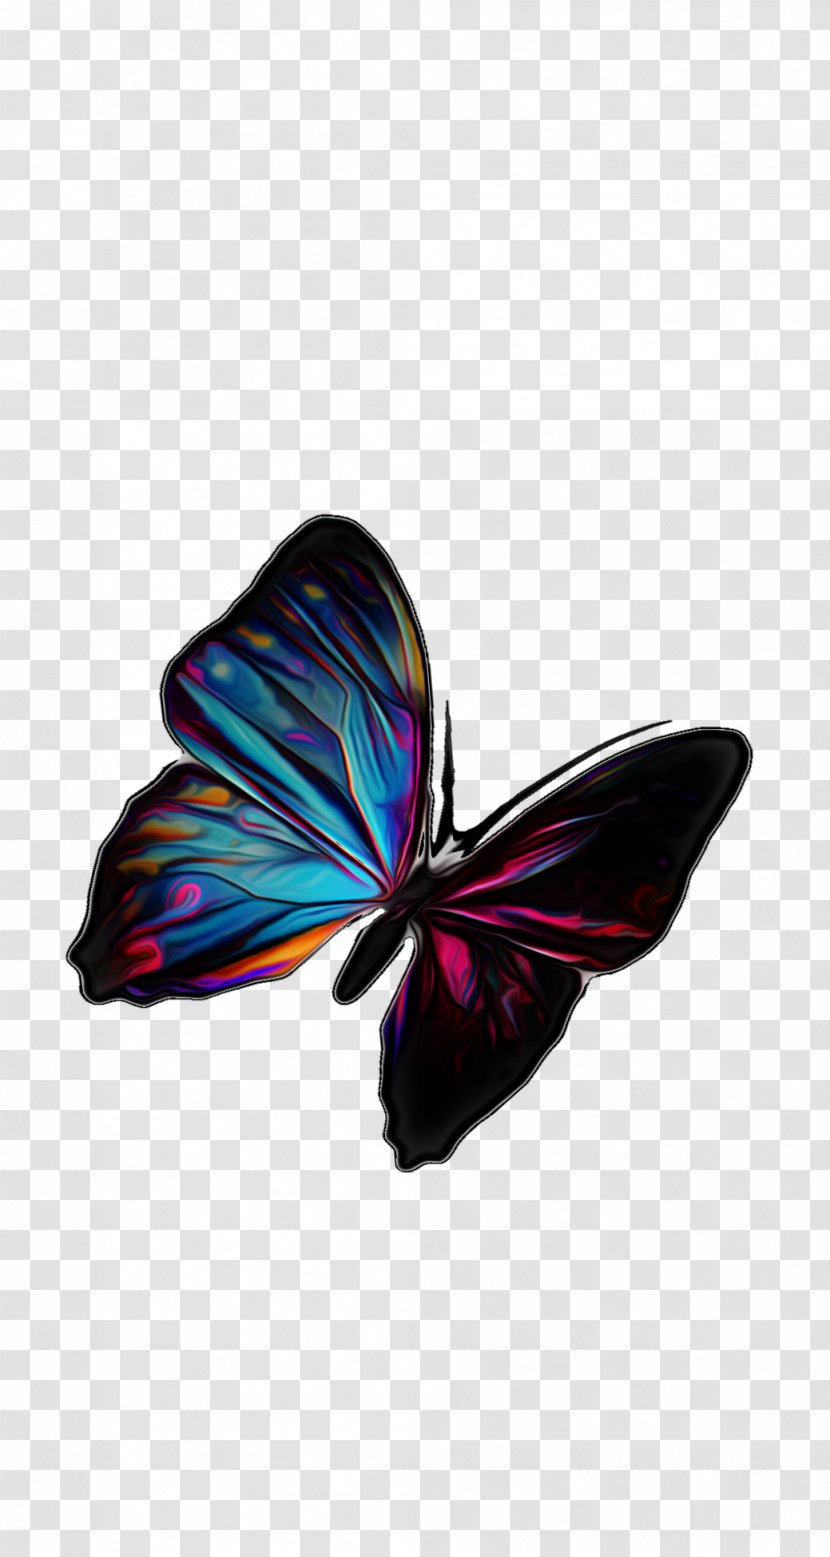 Butterfly Insect Image Photograph - Arthropod Transparent PNG